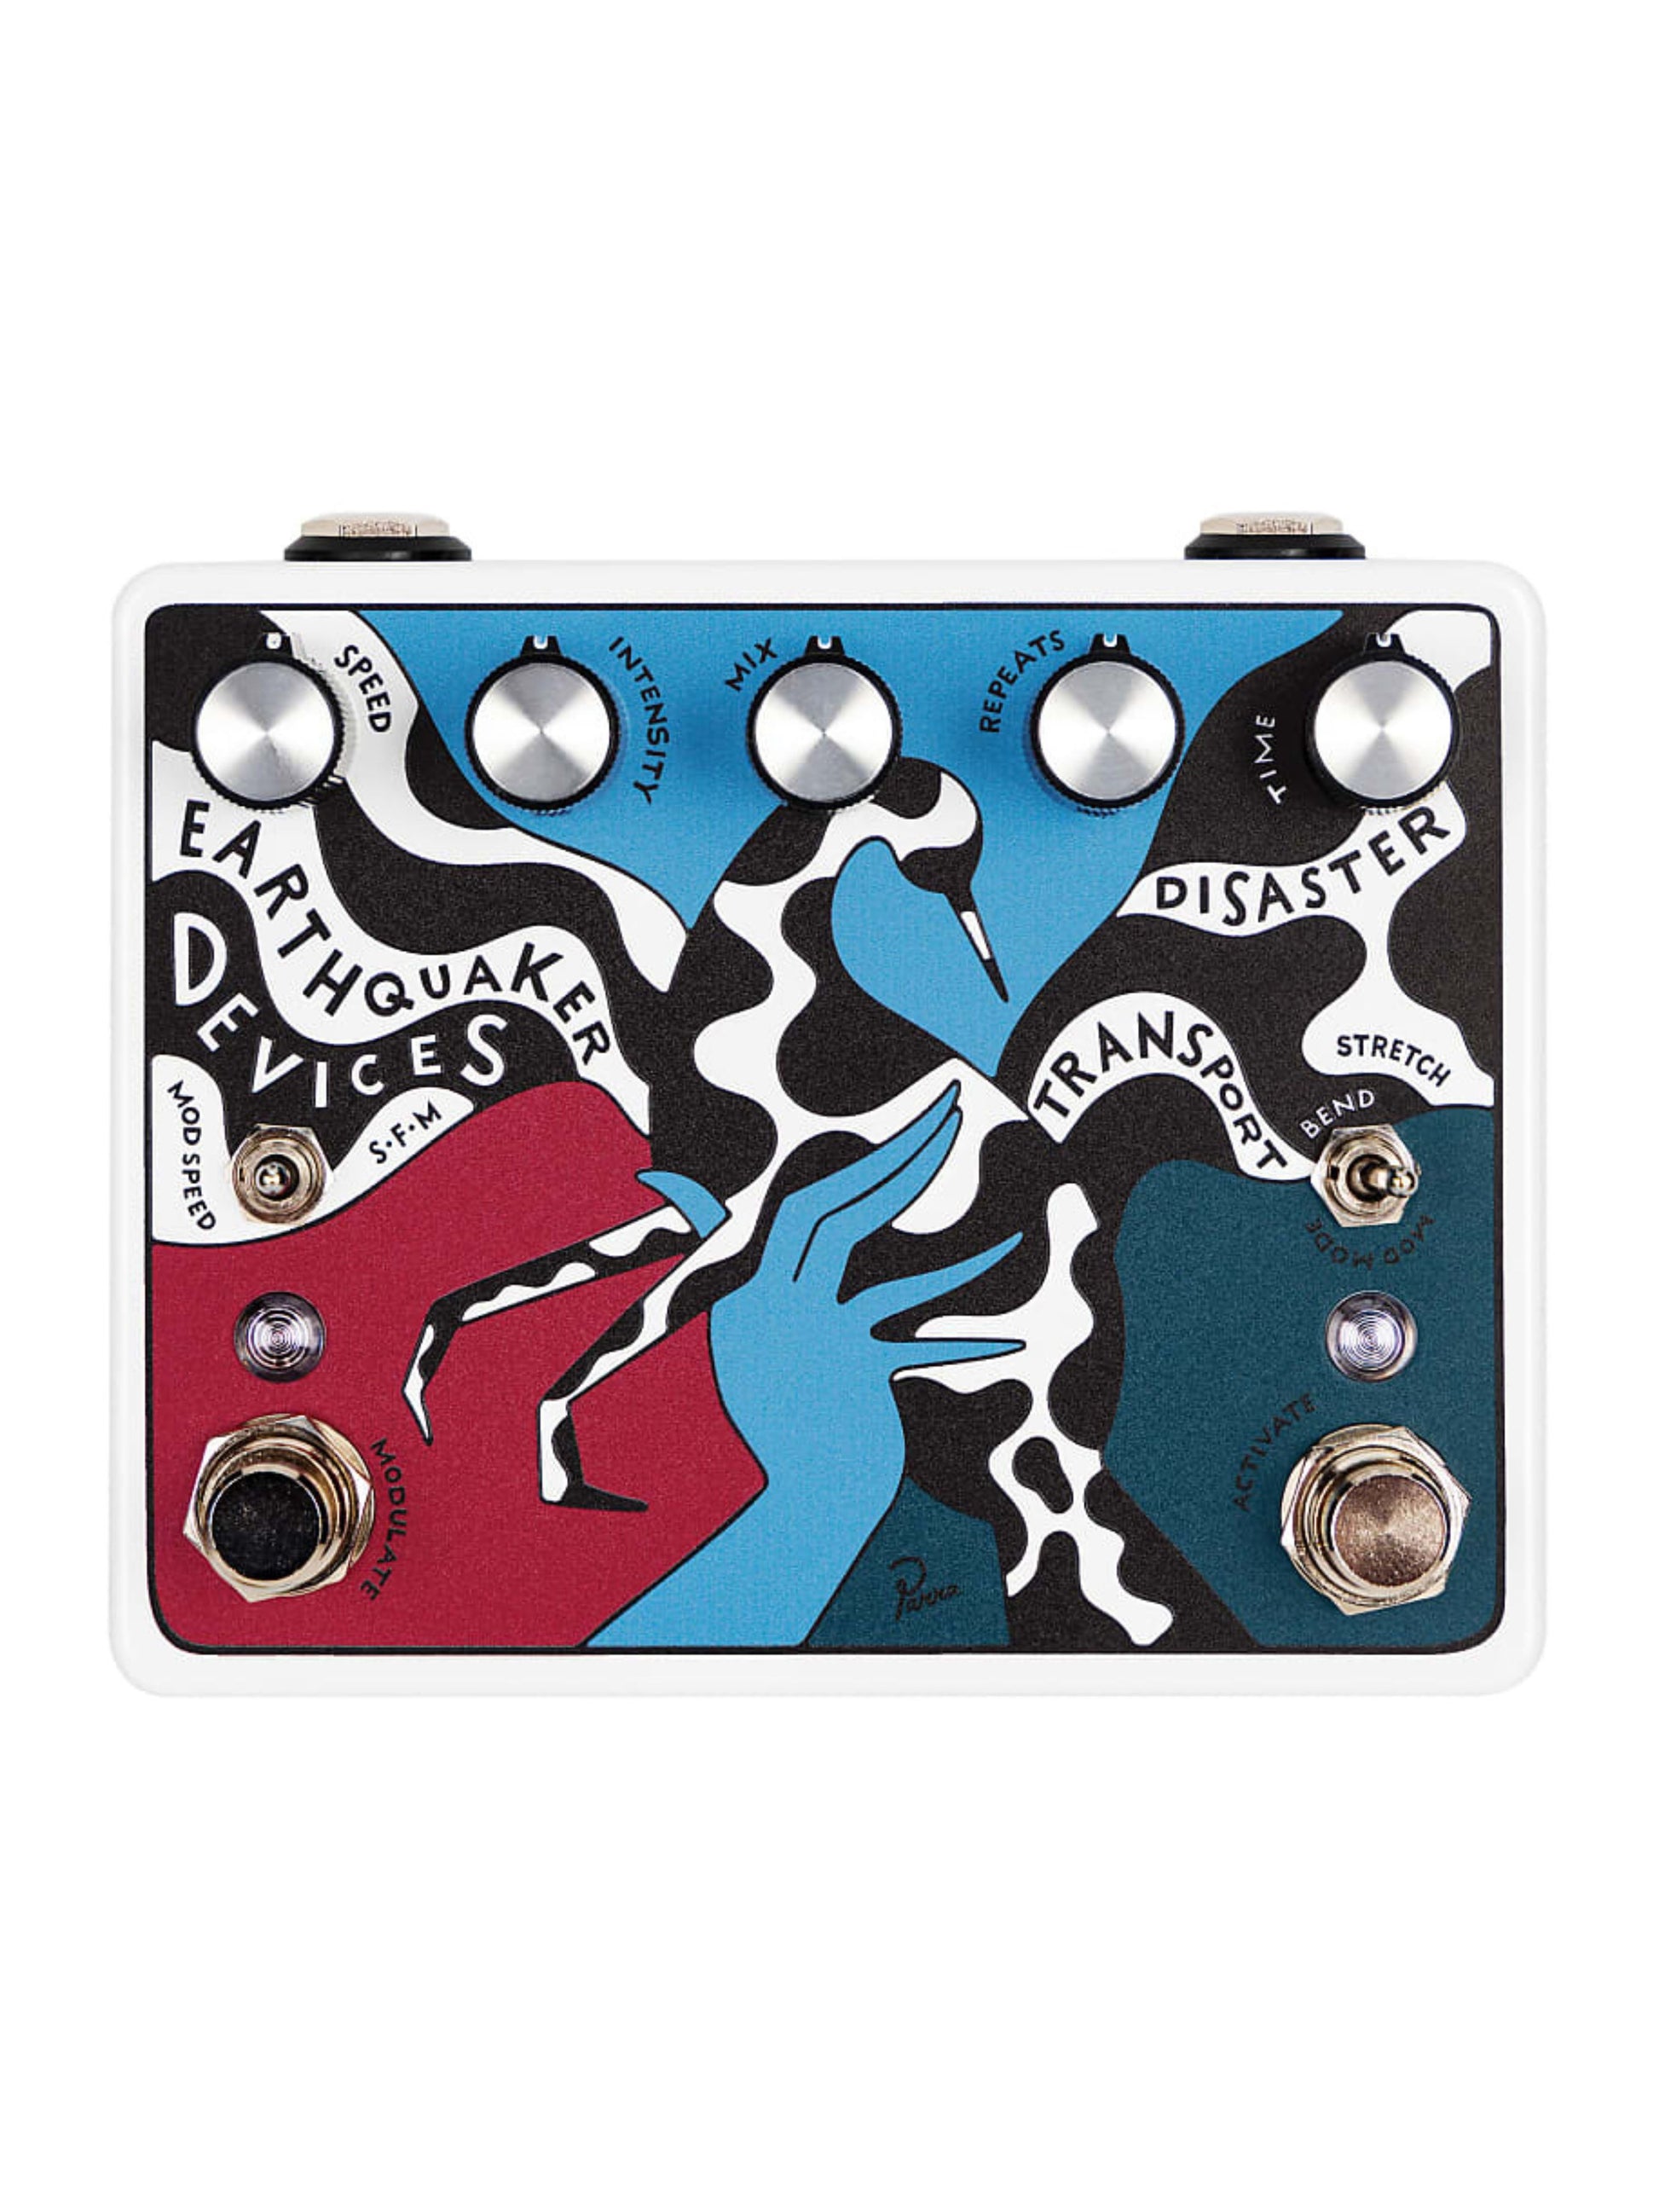 EarthQuaker Devices Disaster Transport by Parra Modulated Delay Pedal